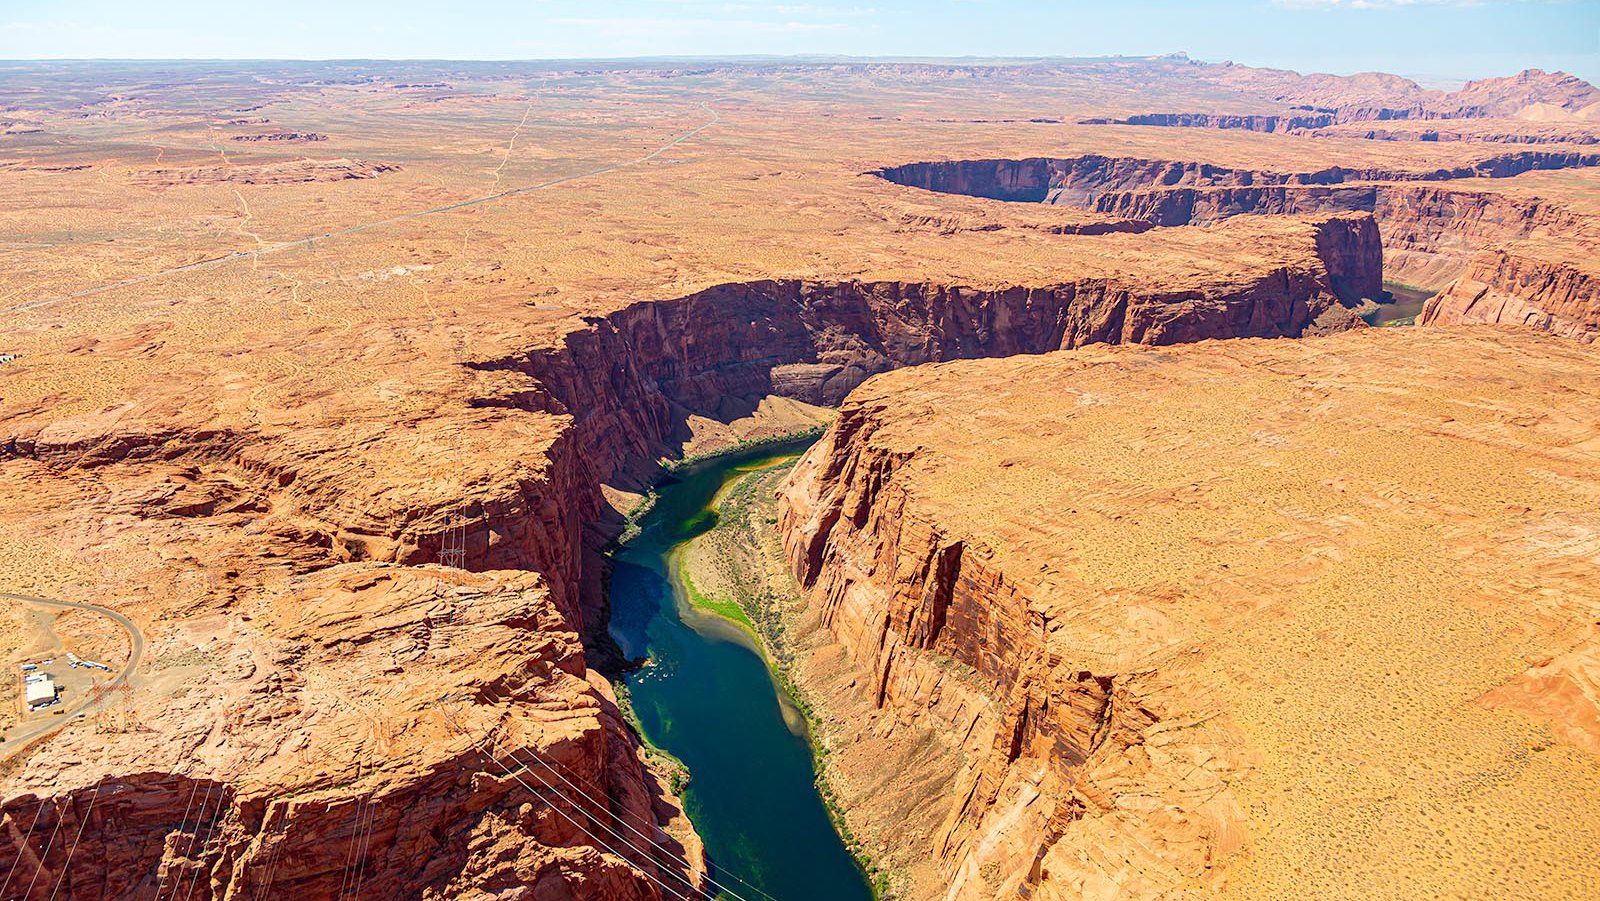 Blog photo of the Grand Canyon National Park with water visible at the bottom of the canyon